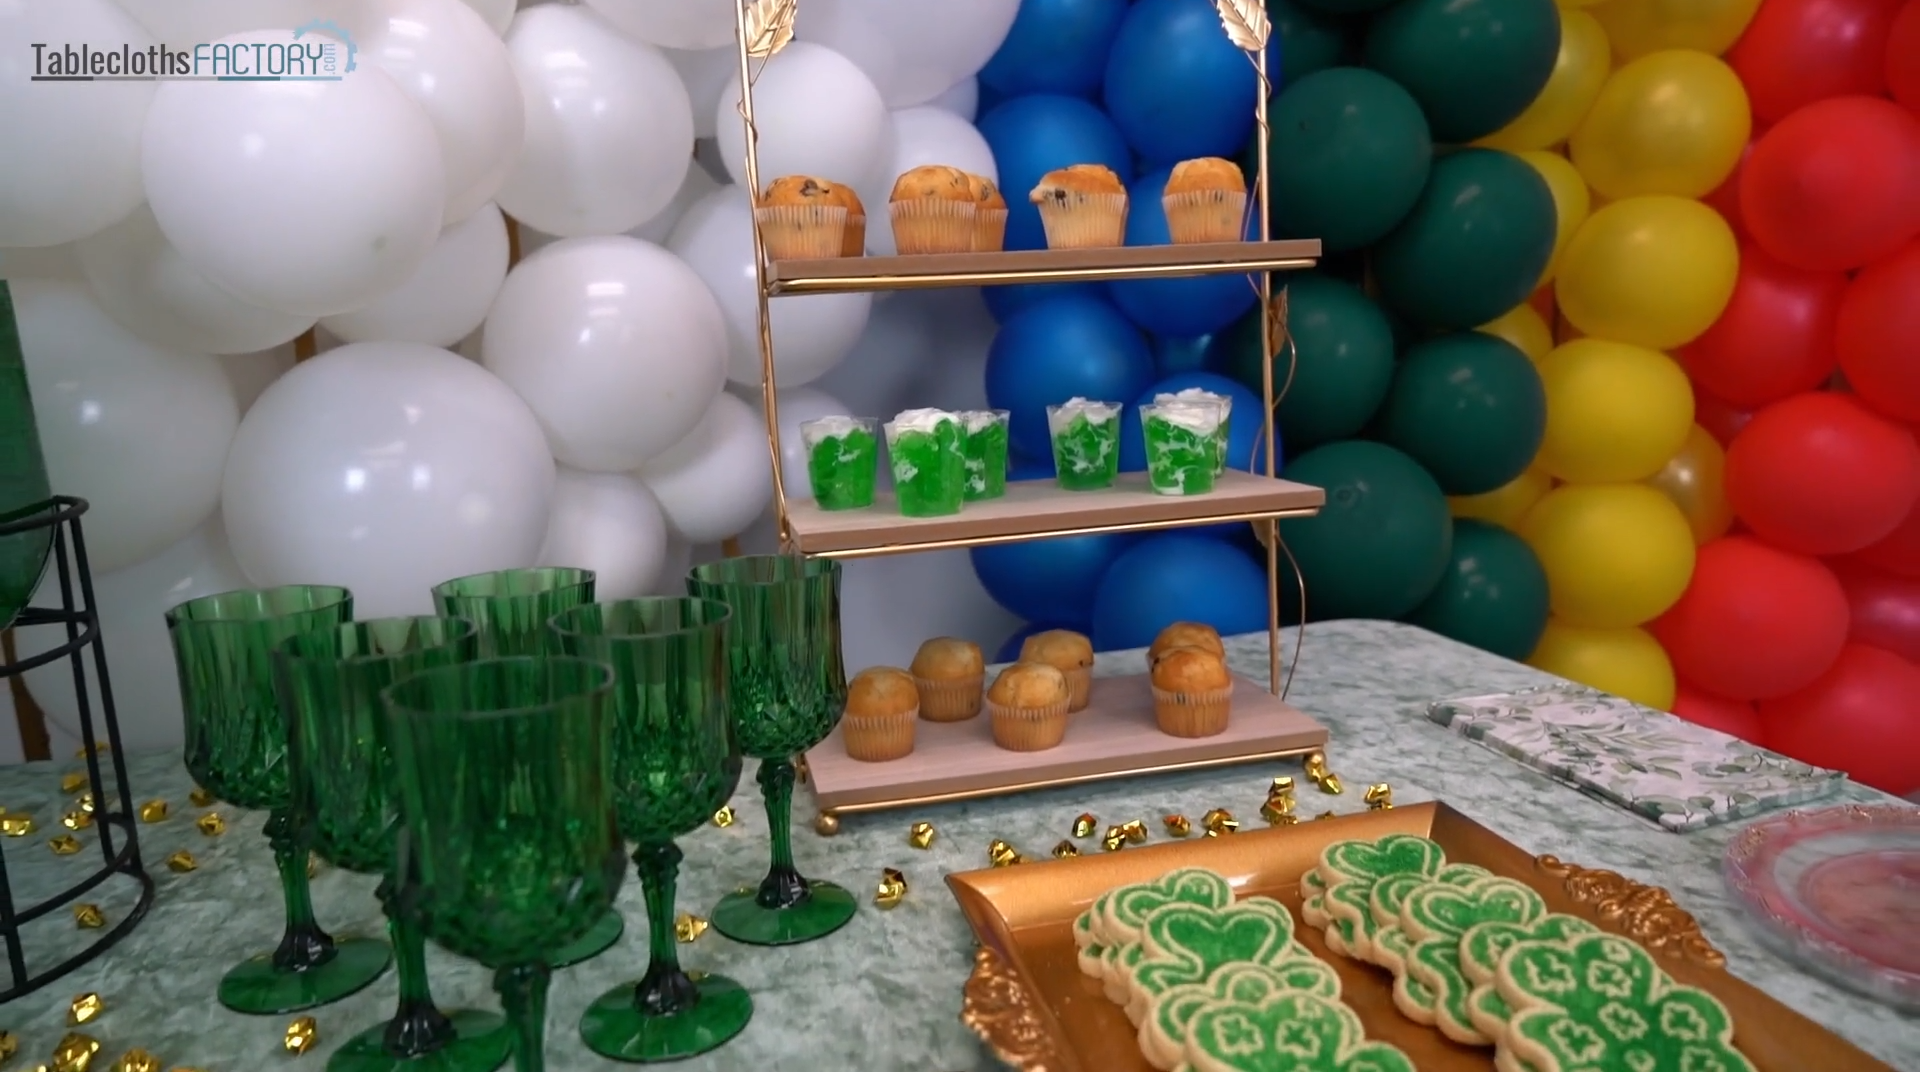 Cupcake stand, green wine glasses, and gold tray on the table